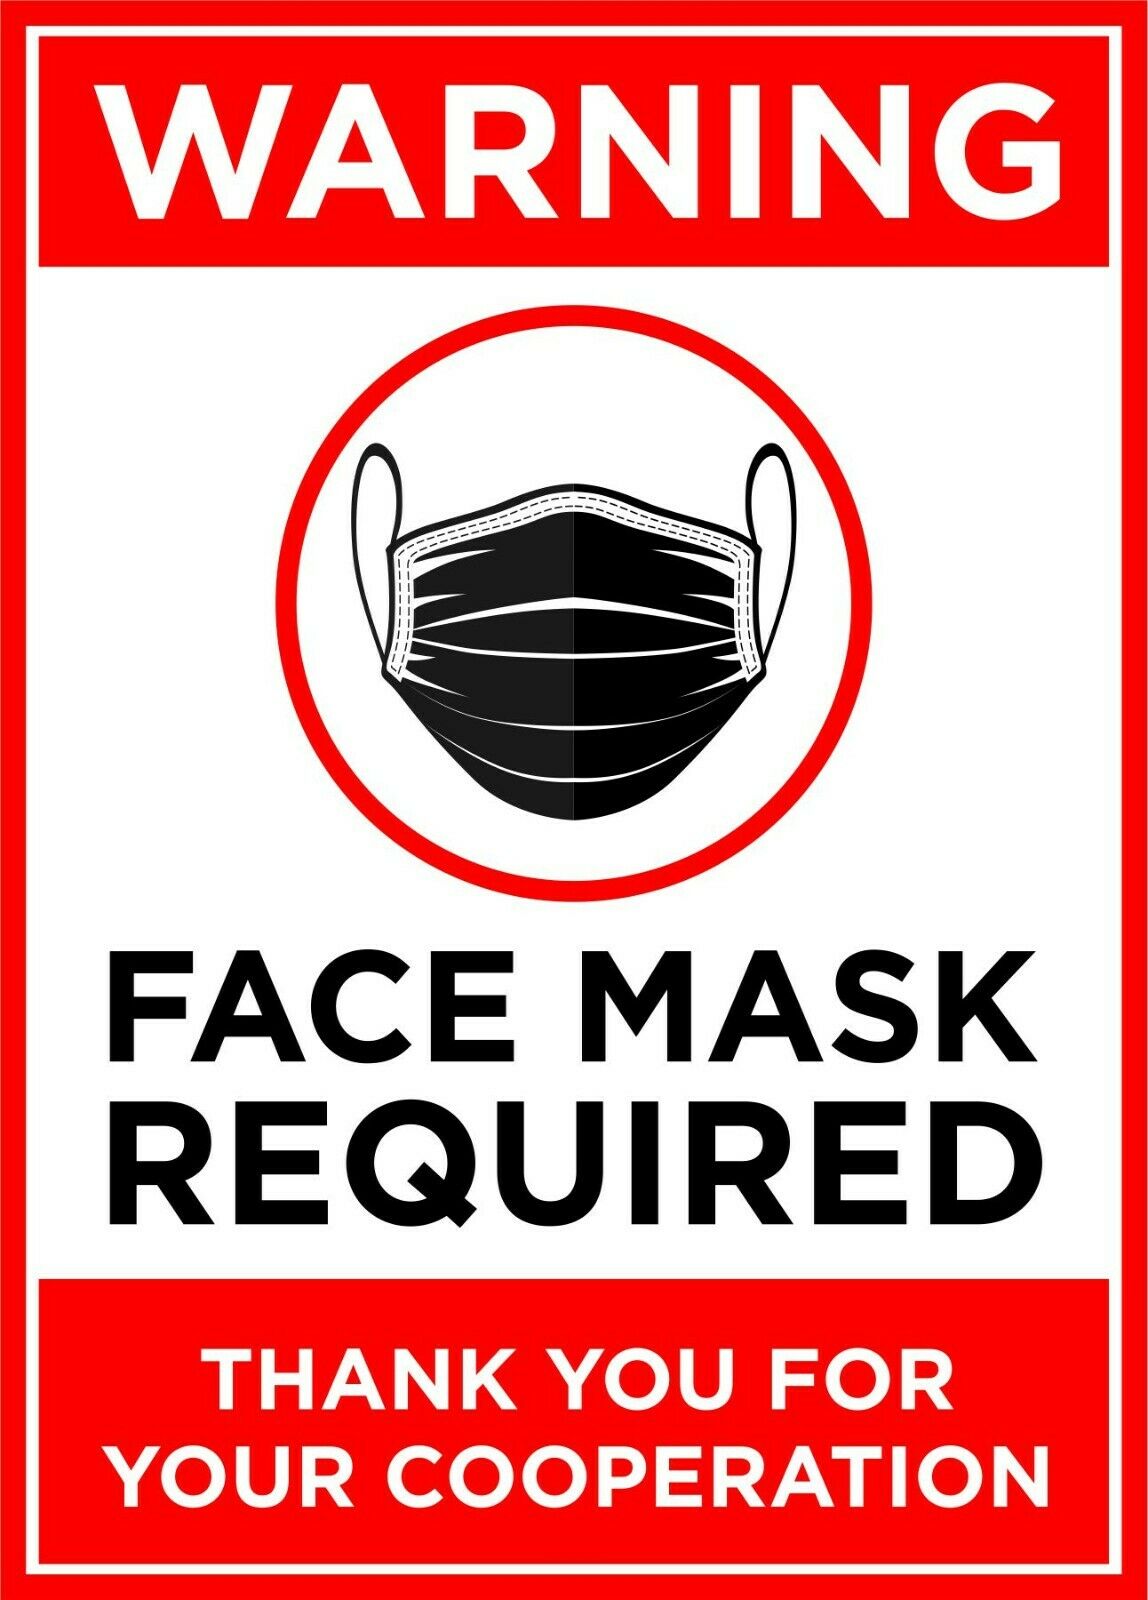 Warning Face Mask Required Window/Door Stickers  5.5" x 4" QUANTITY OF 2 DECALS - Powercall Sirens LLC